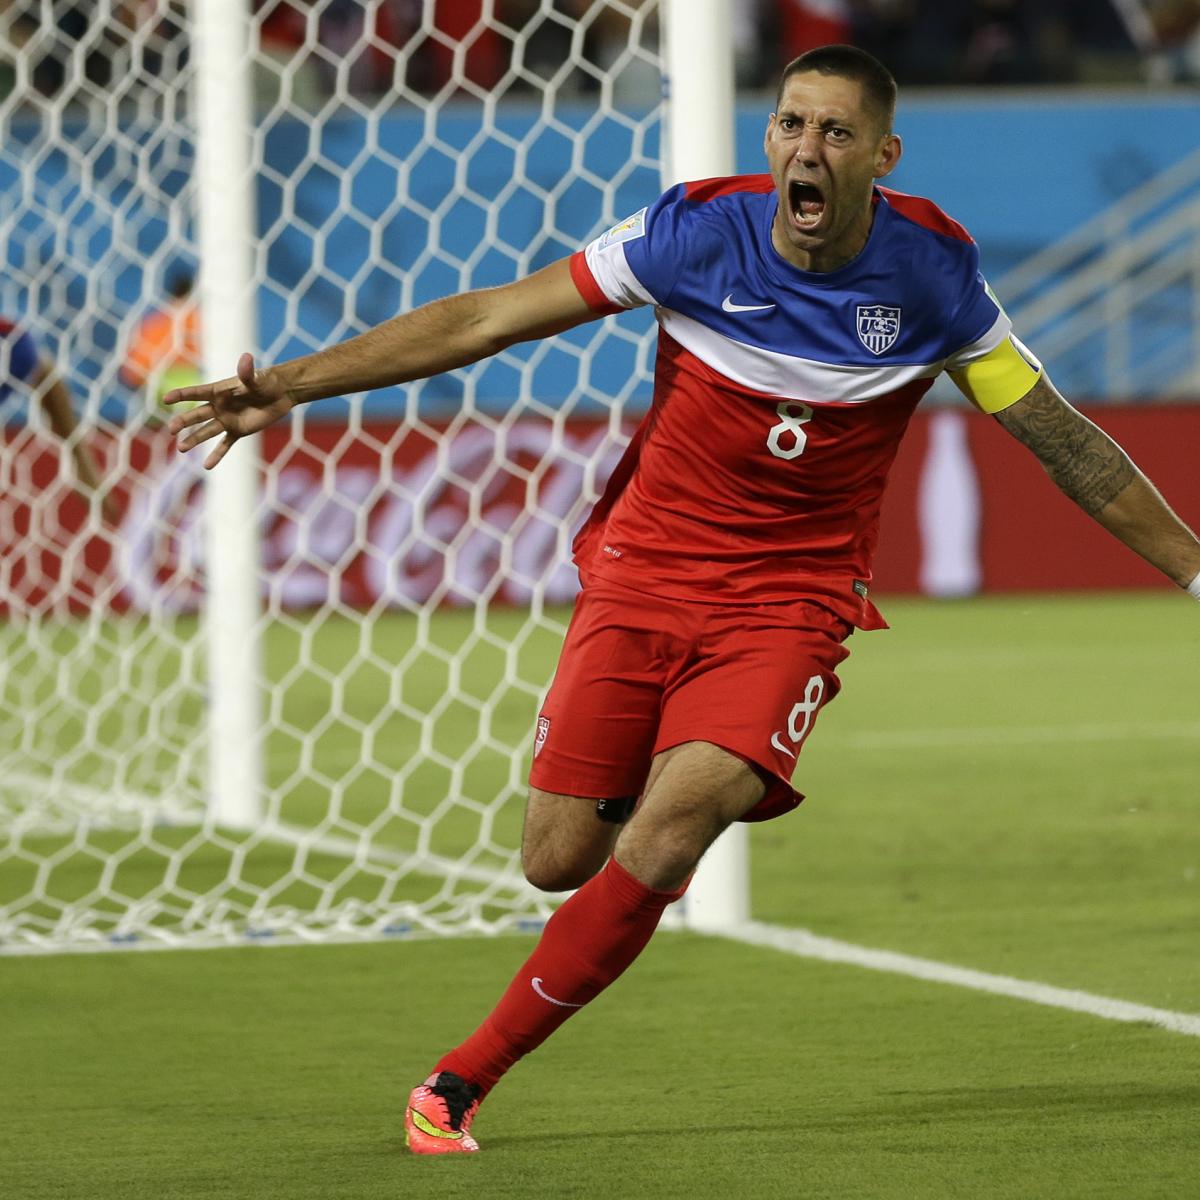 USA vs. Portugal scouting report: How Americans secure much-needed result